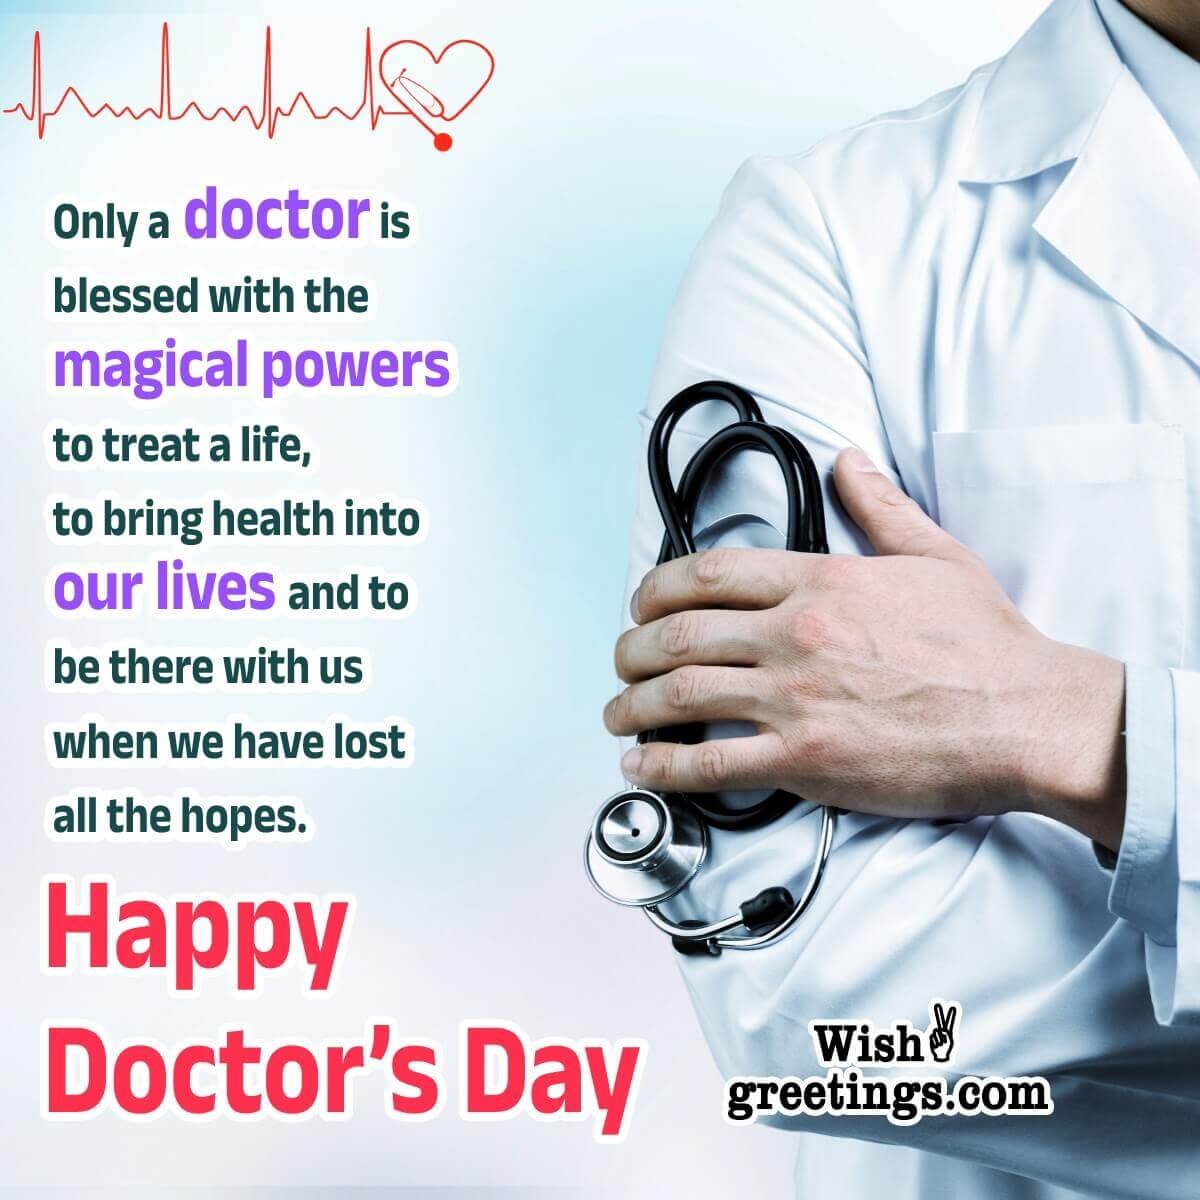 National Doctor’s Day Wishes, Quotes and Messages Wish Greetings